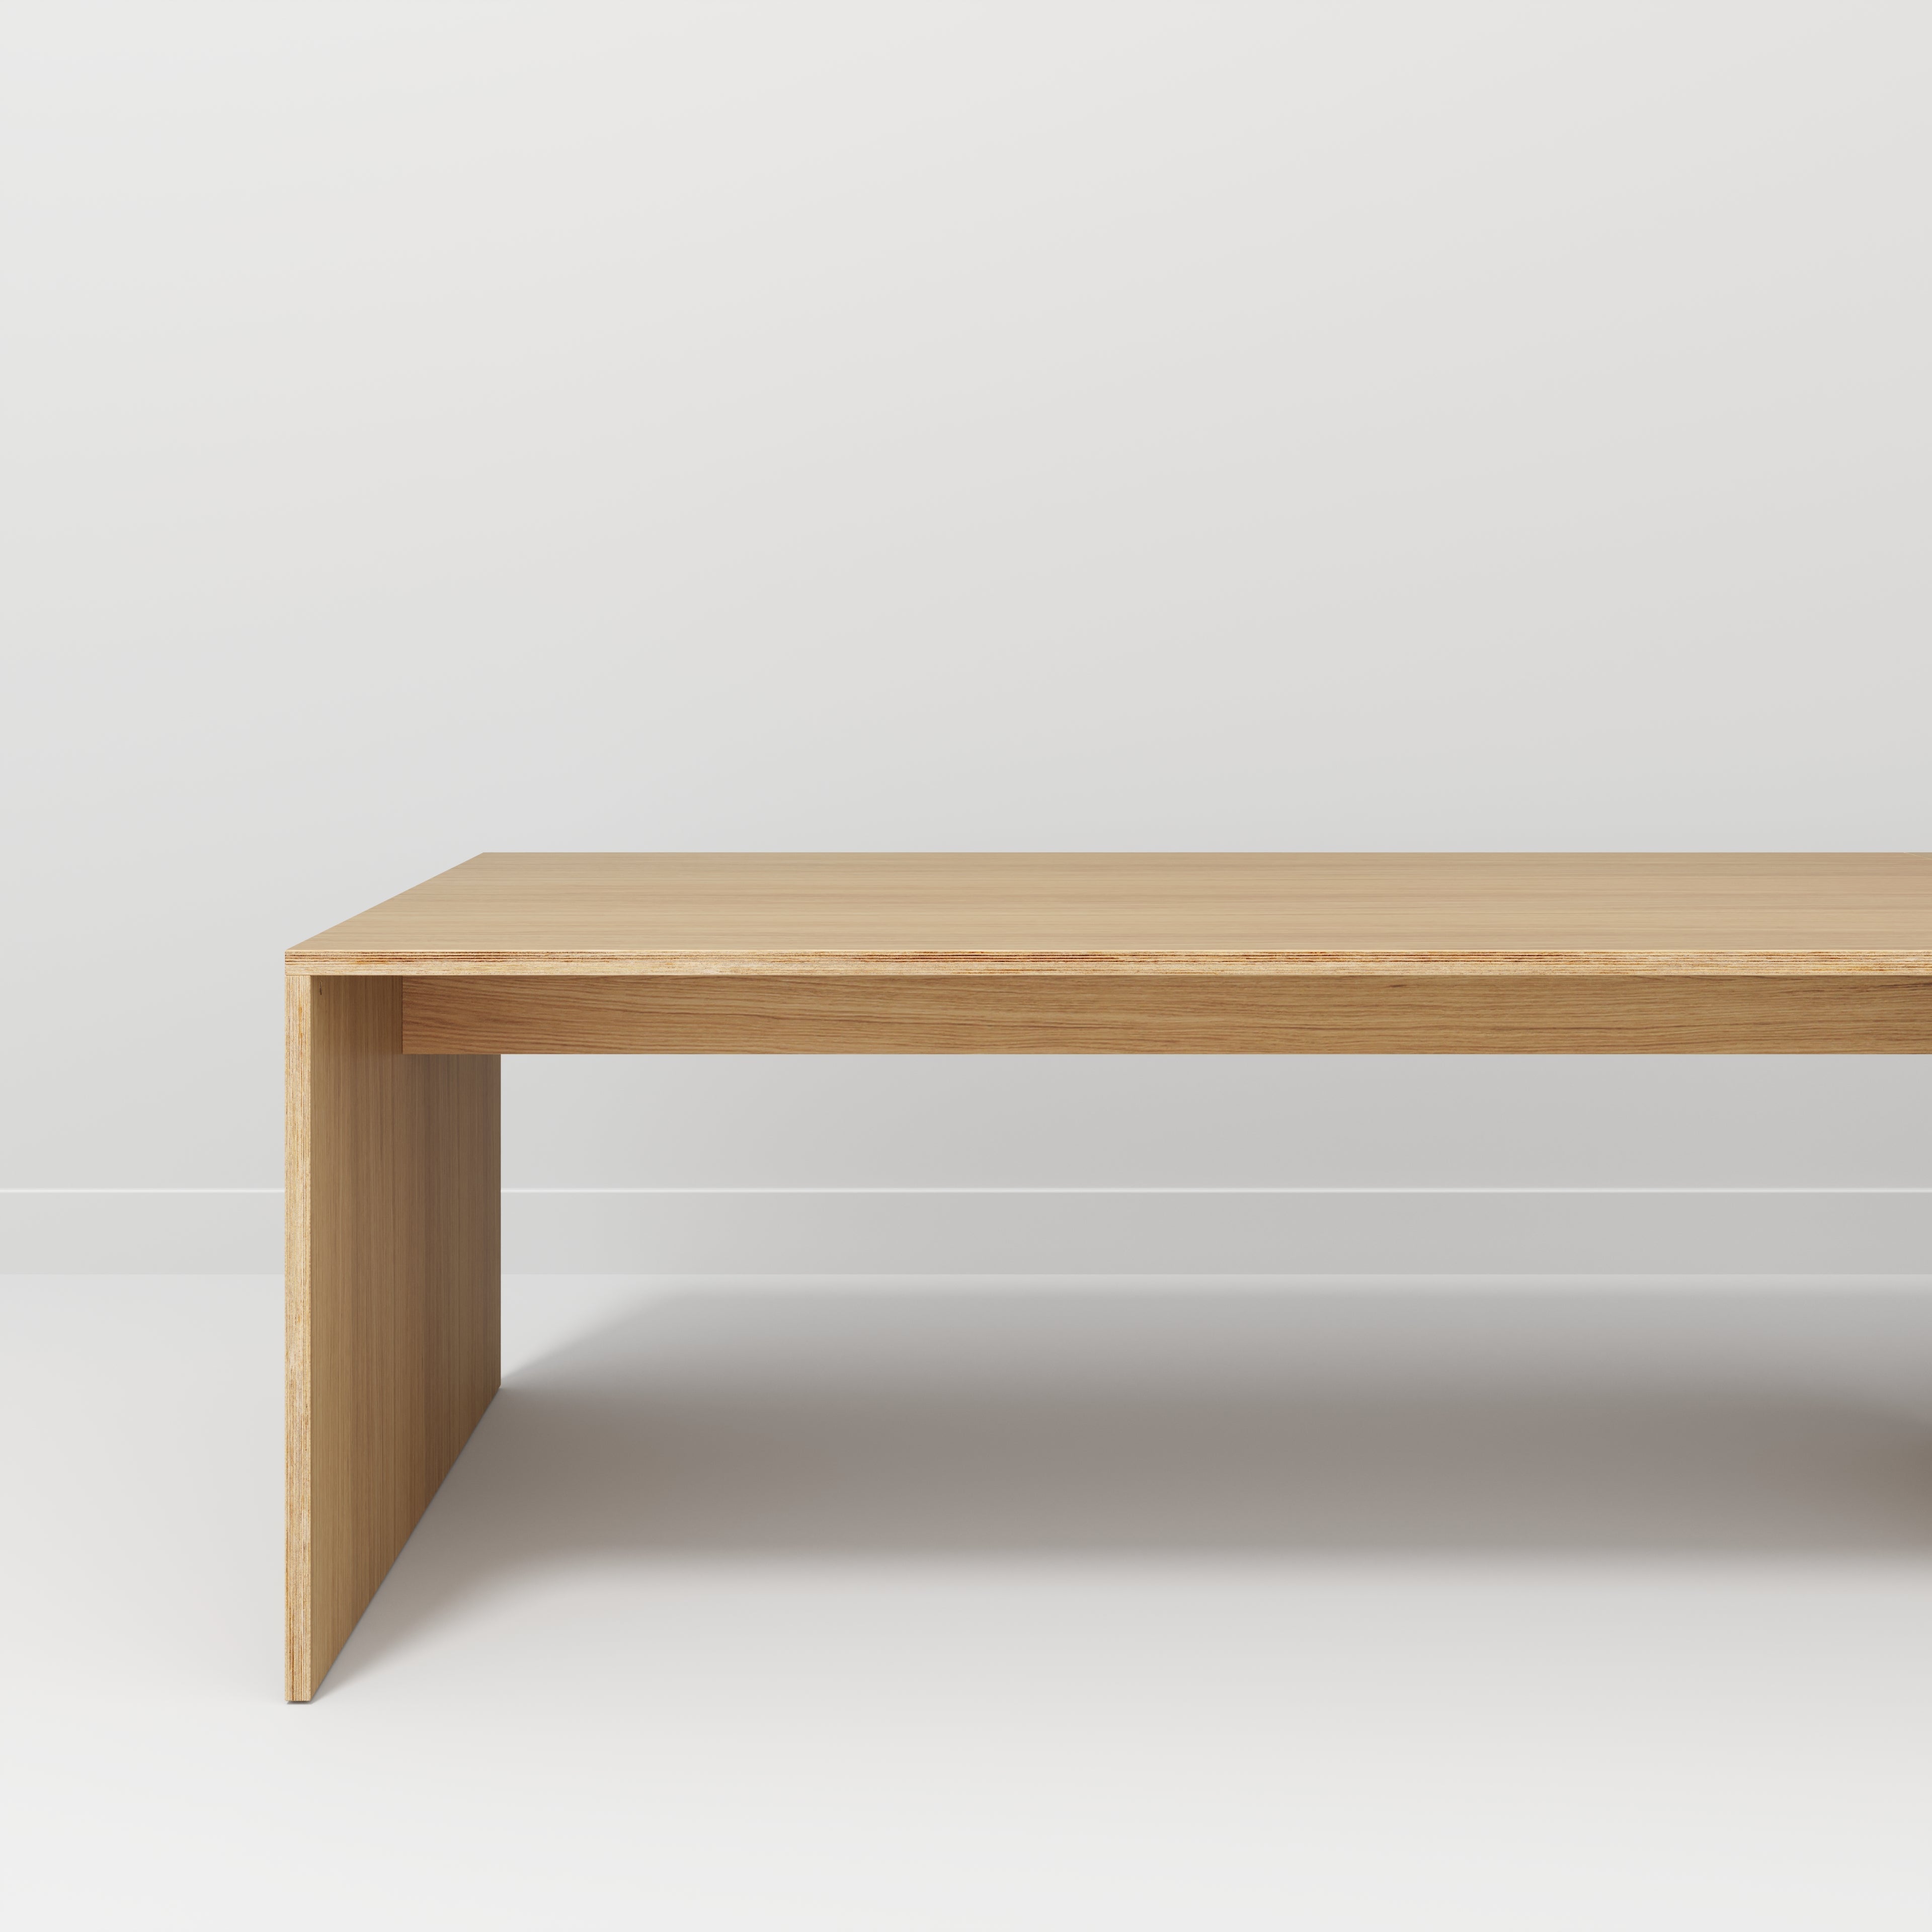 Table with Solid Sides - Plywood Oak - 5600(w) x 1000(d) x 750(h)